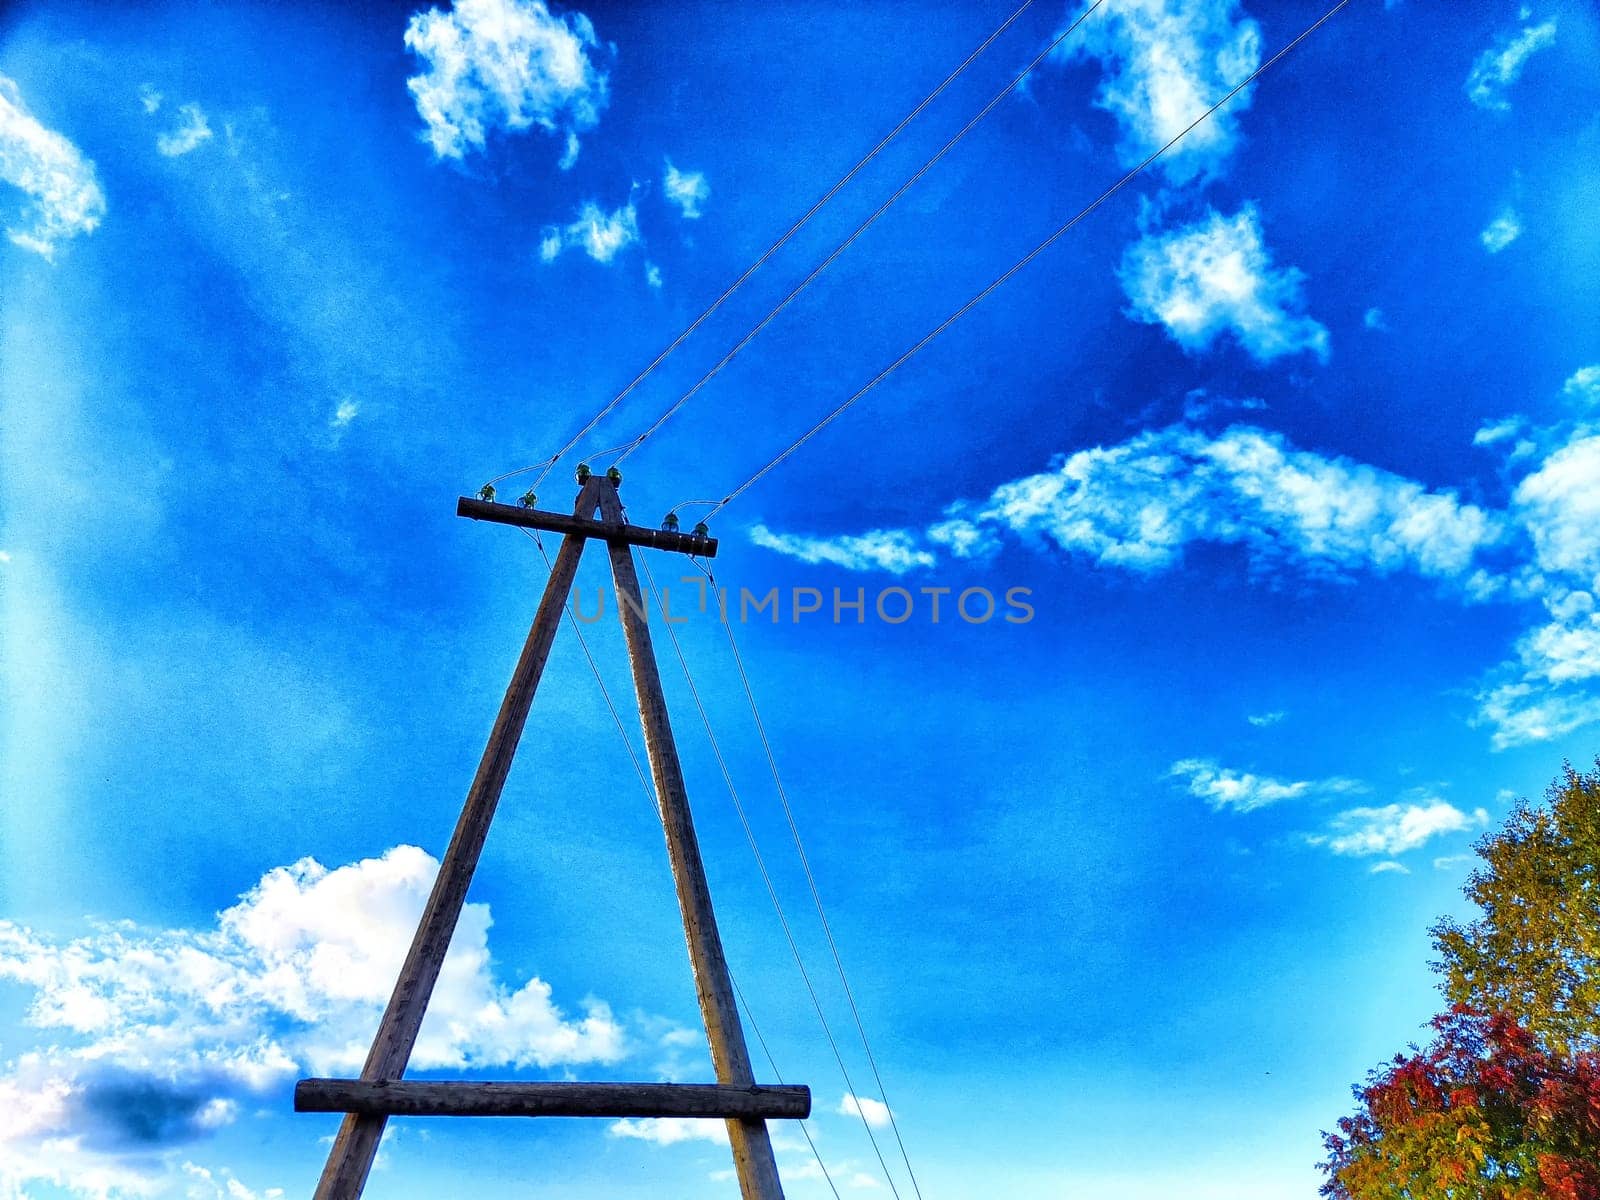 Old pole with wires against the sky. Electric transmission line. Eco-friendly energy by keleny